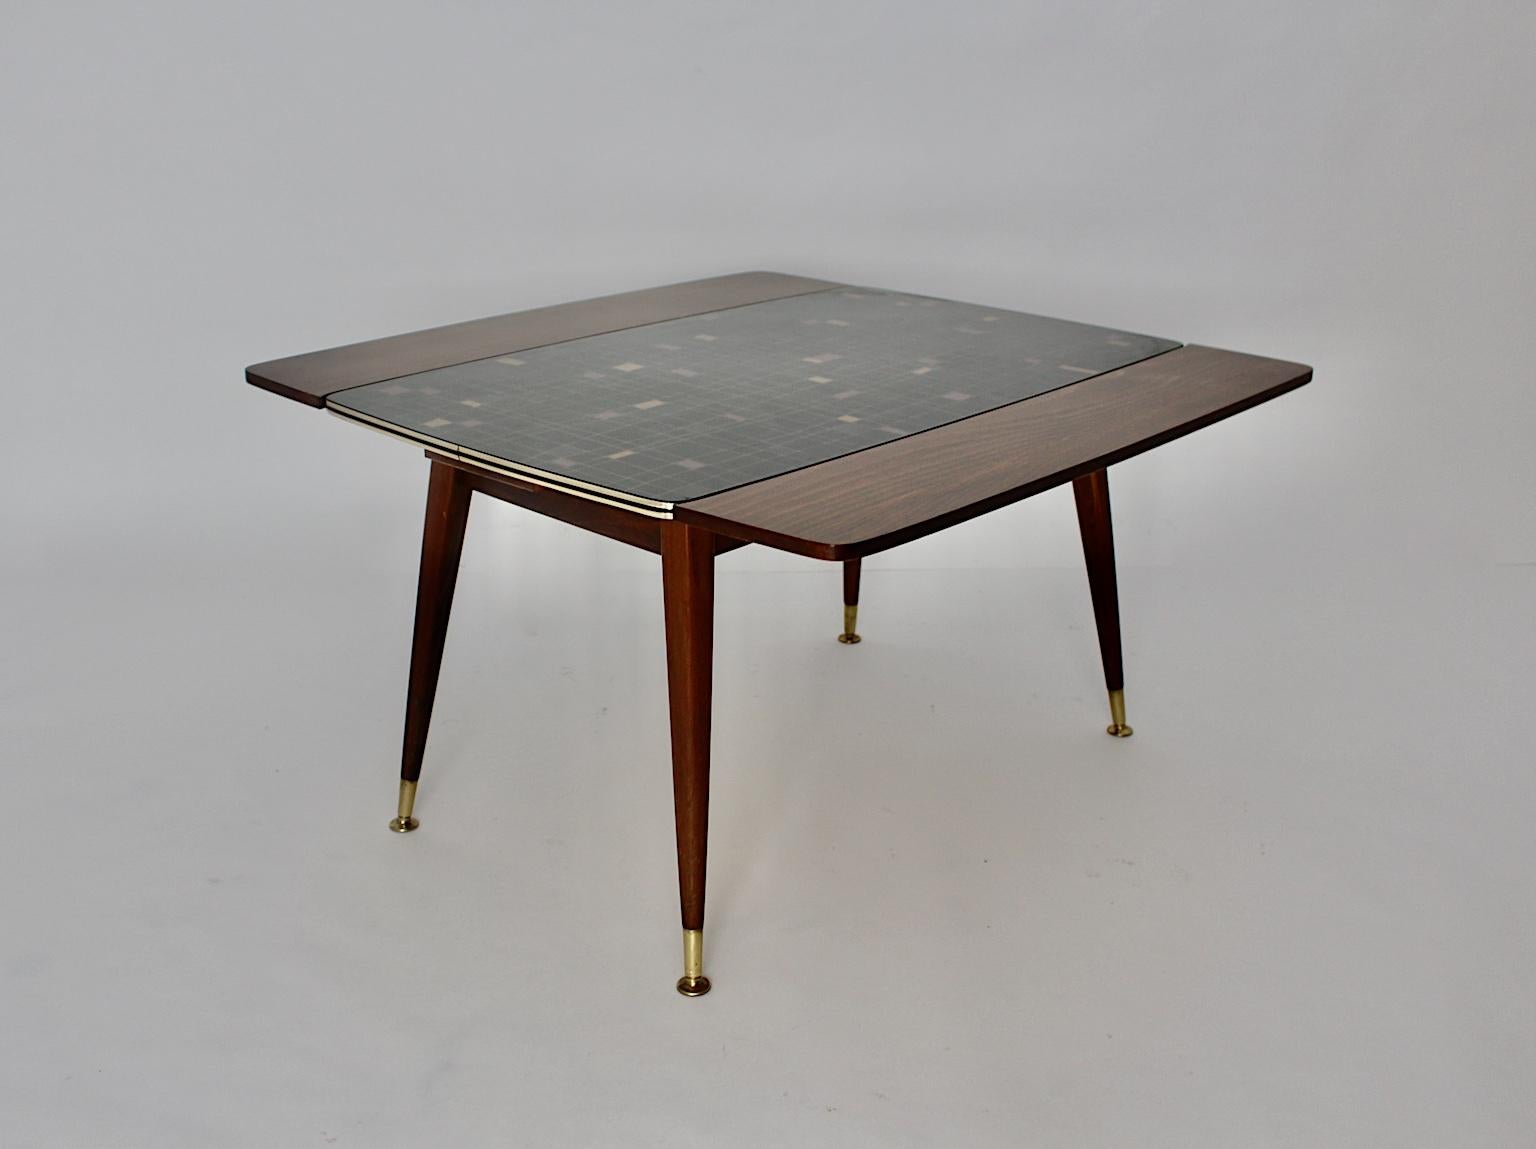 A Mid-Century Modern vintage beech brass sofa table or dining table, which was created and designed 1950s Vienna.
The sofa table or dining table was made of beech, pressboard, formica, metal and brass. A great design feature is an adaptability of